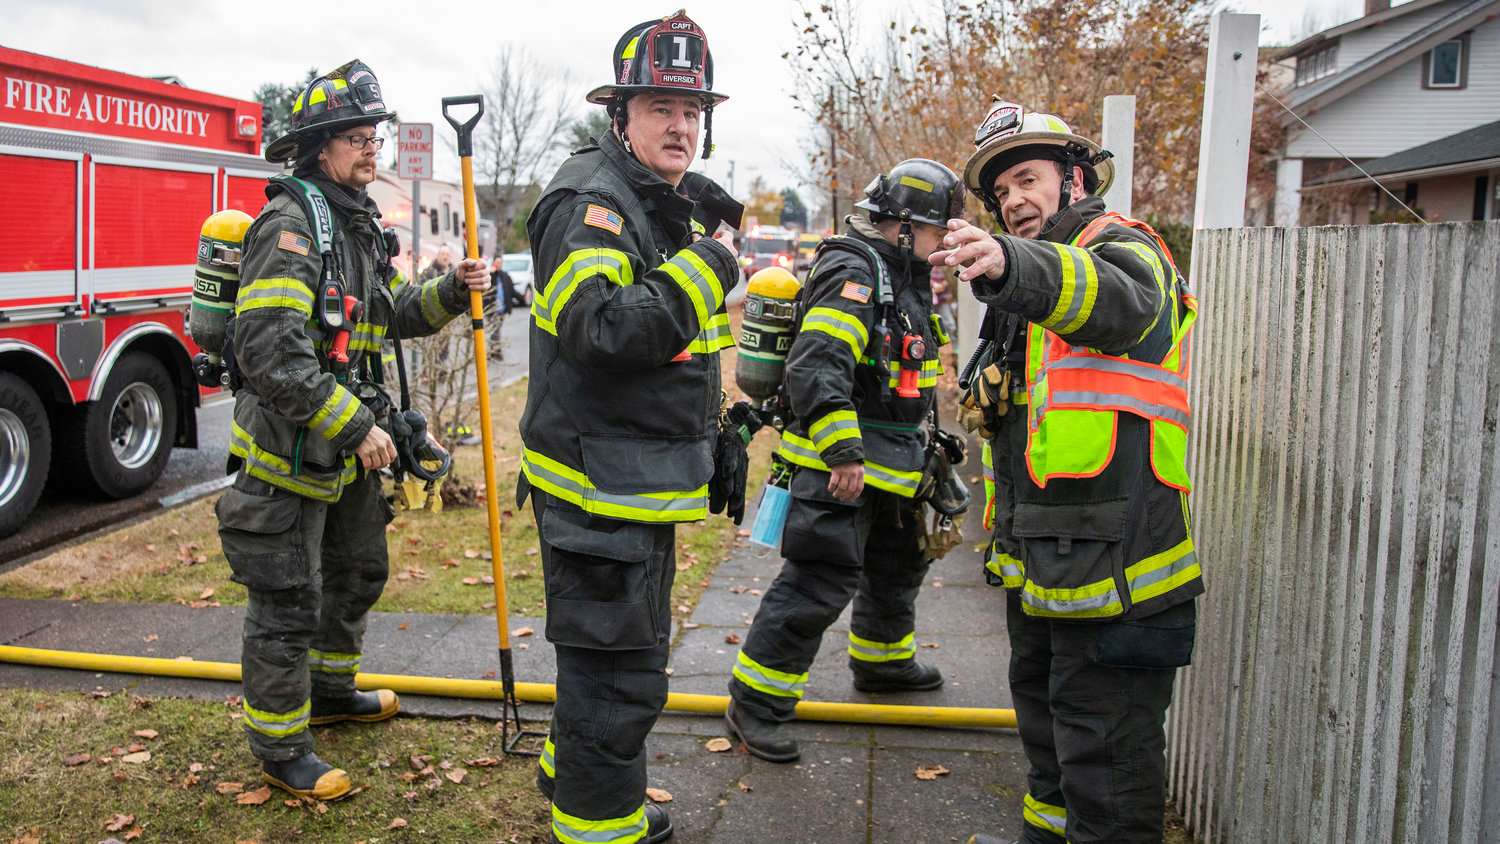 Chief Mike Kytta, of Riverside Fire Authority, far right, organizes crews responding to a residential fire in the 200 block of North Rock Street in Centralia on Friday.